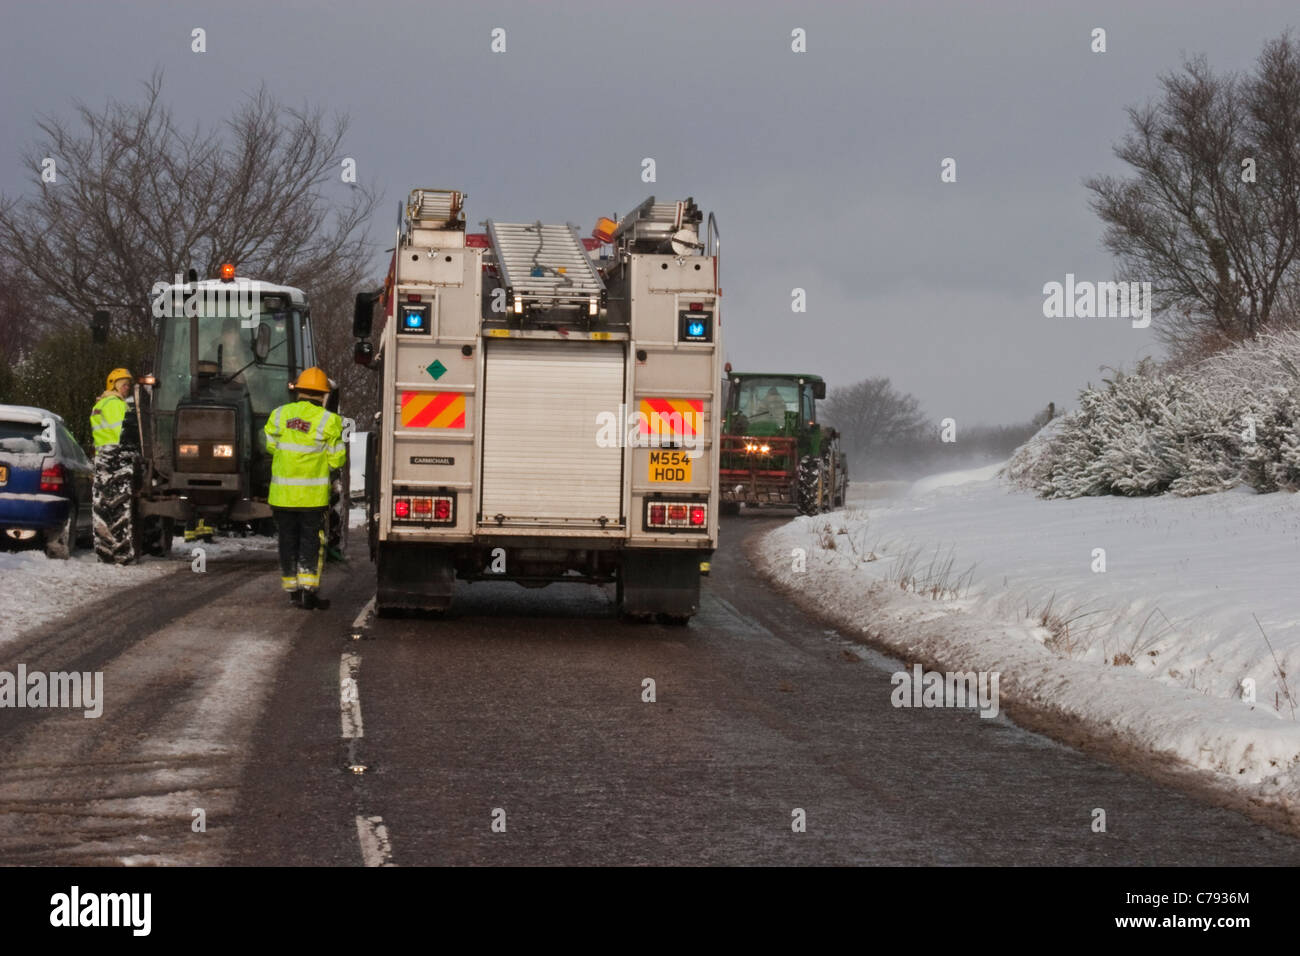 Trunk-road blocked in heavy snow after a vehicle went off the road. Local tractors and fire crew assist. Stock Photo